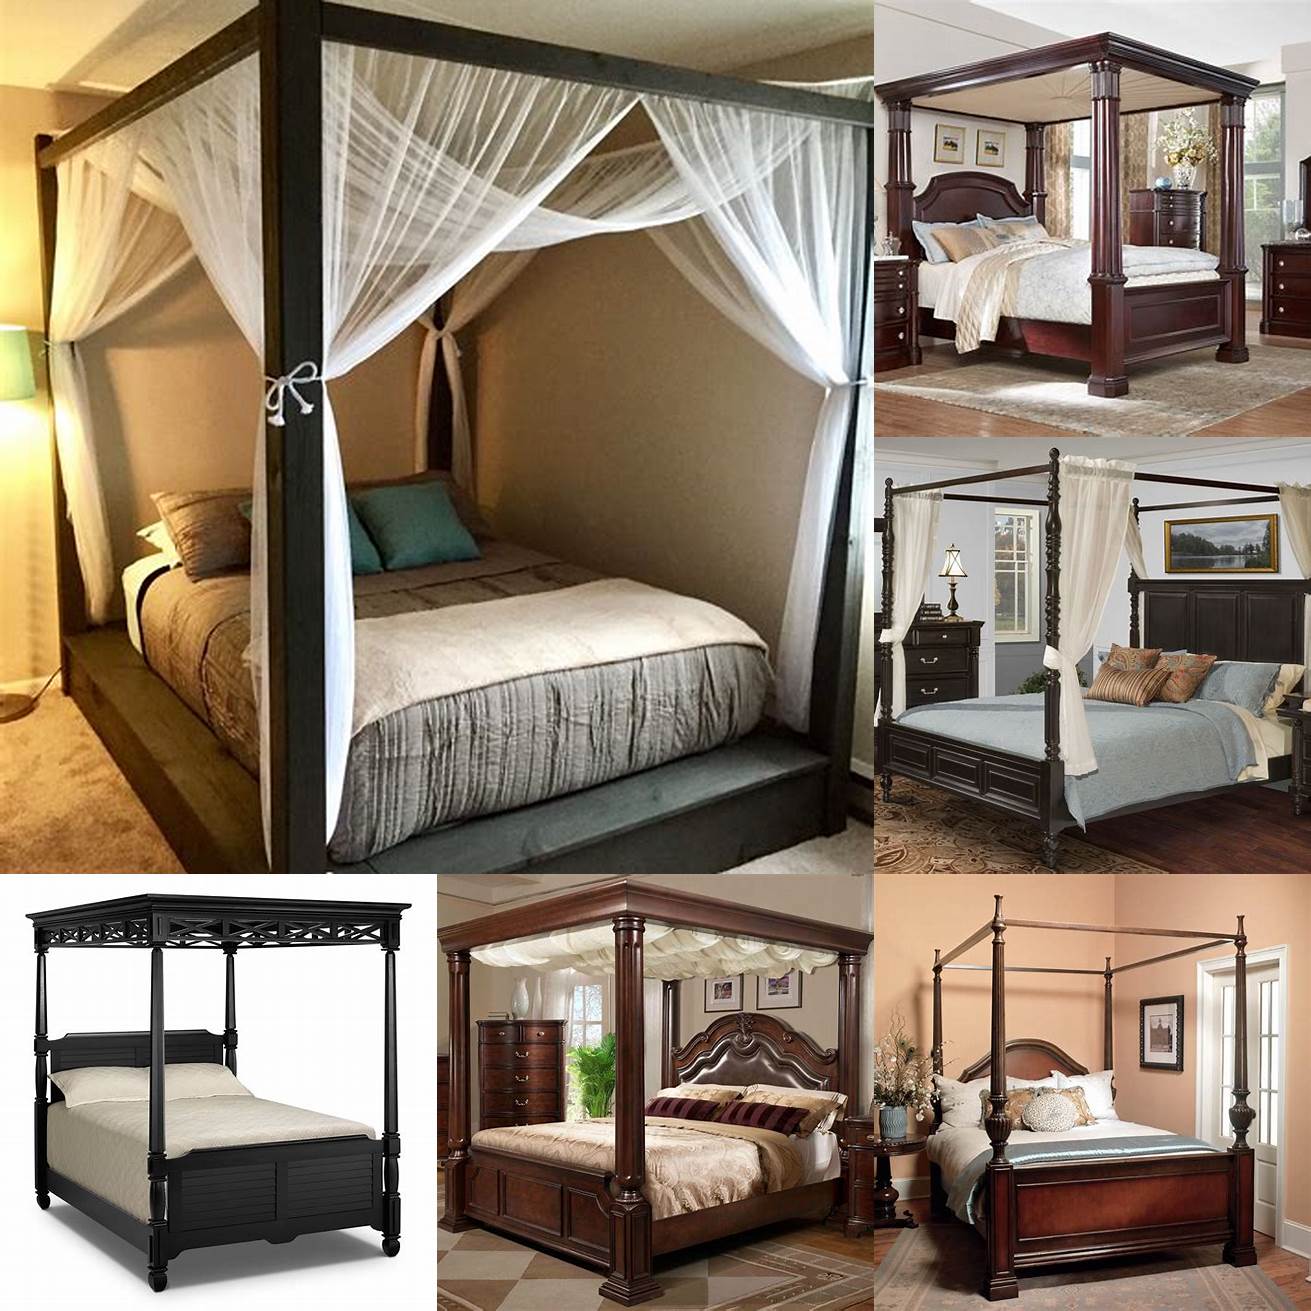 2 Canopy beds